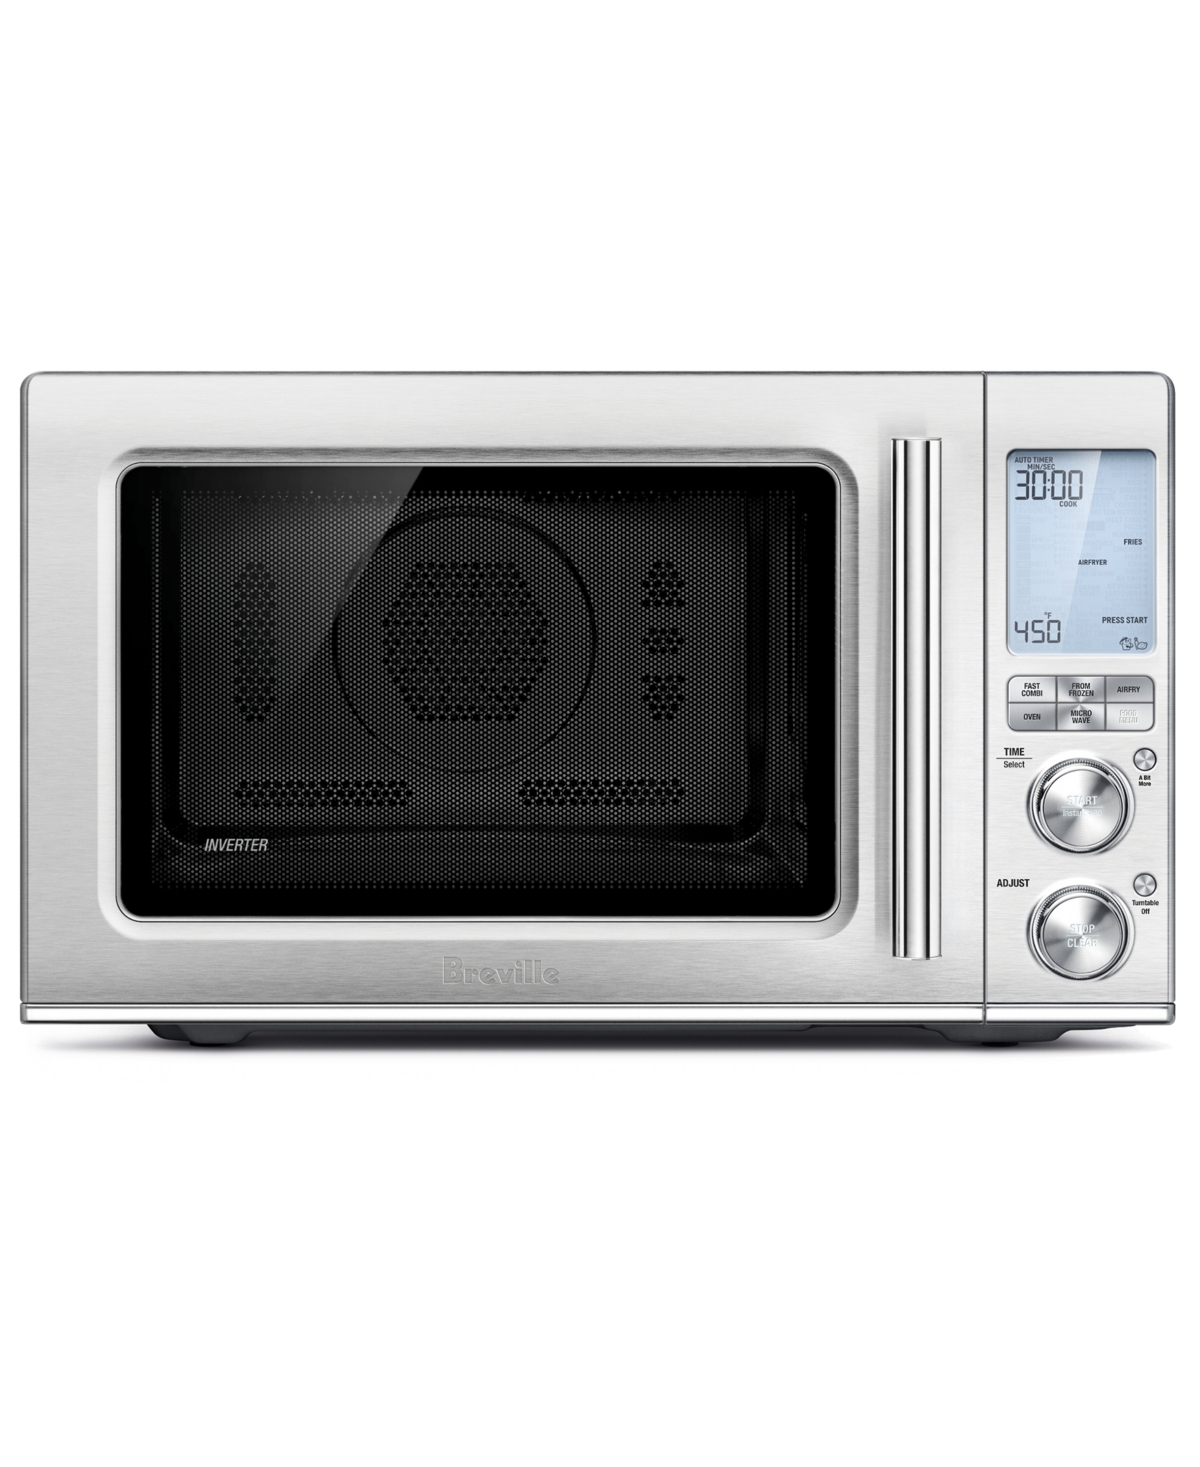 Breville The Combi Wave 3-in-1: Air Fryer, Convection Oven & Inverter Microwave In Brushed Stainless Steel